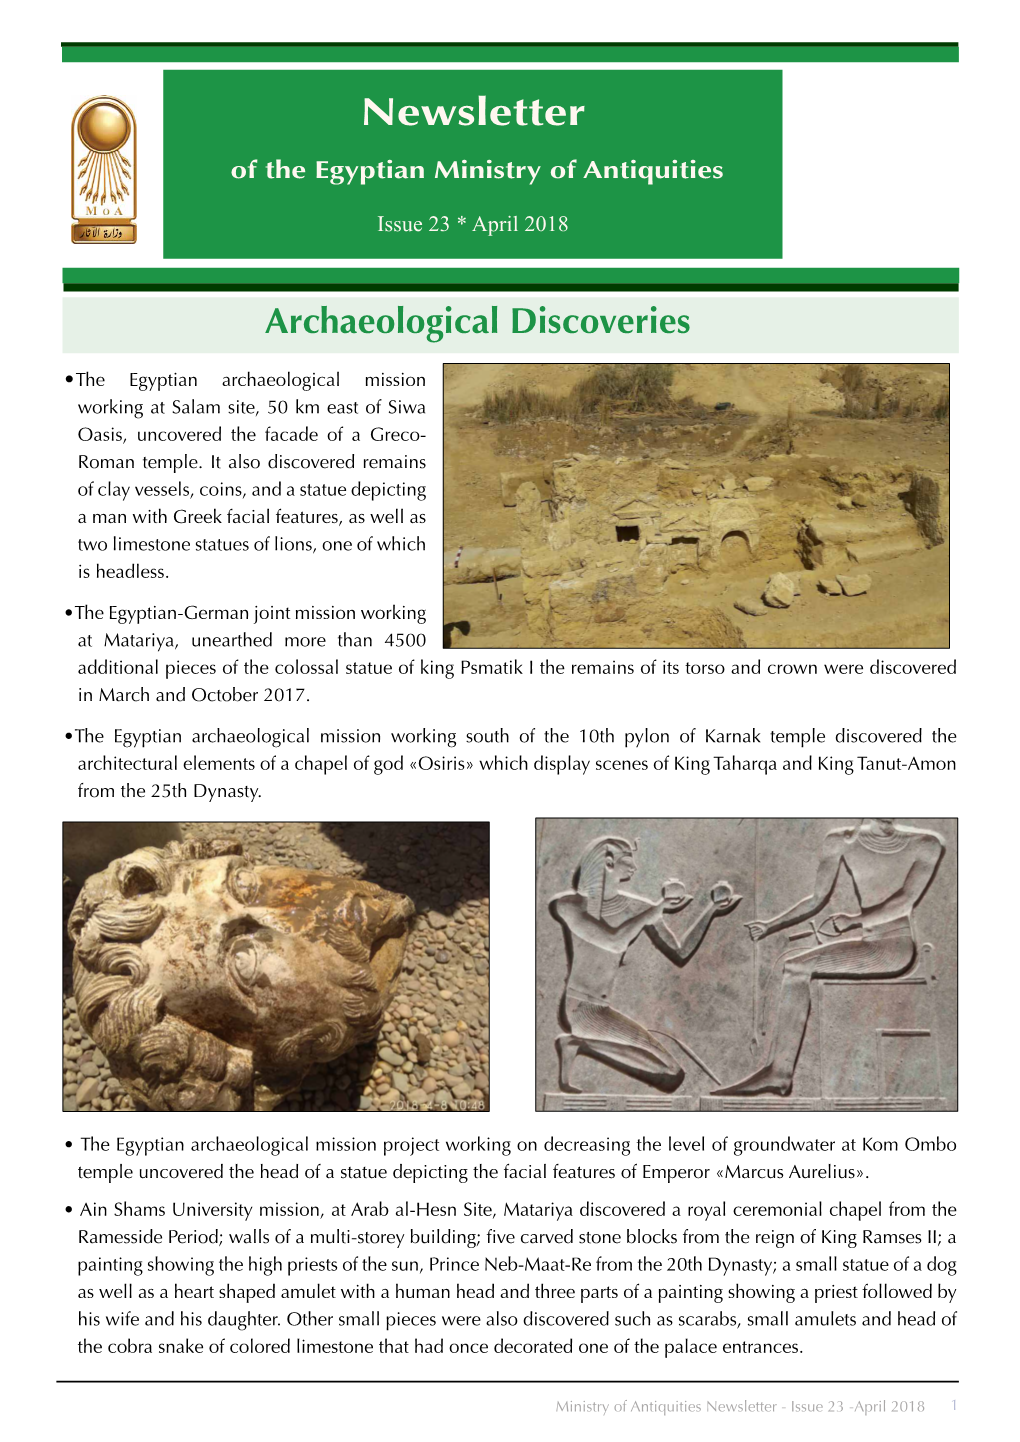 Newsletter of the Egyptian Ministry of Antiquities